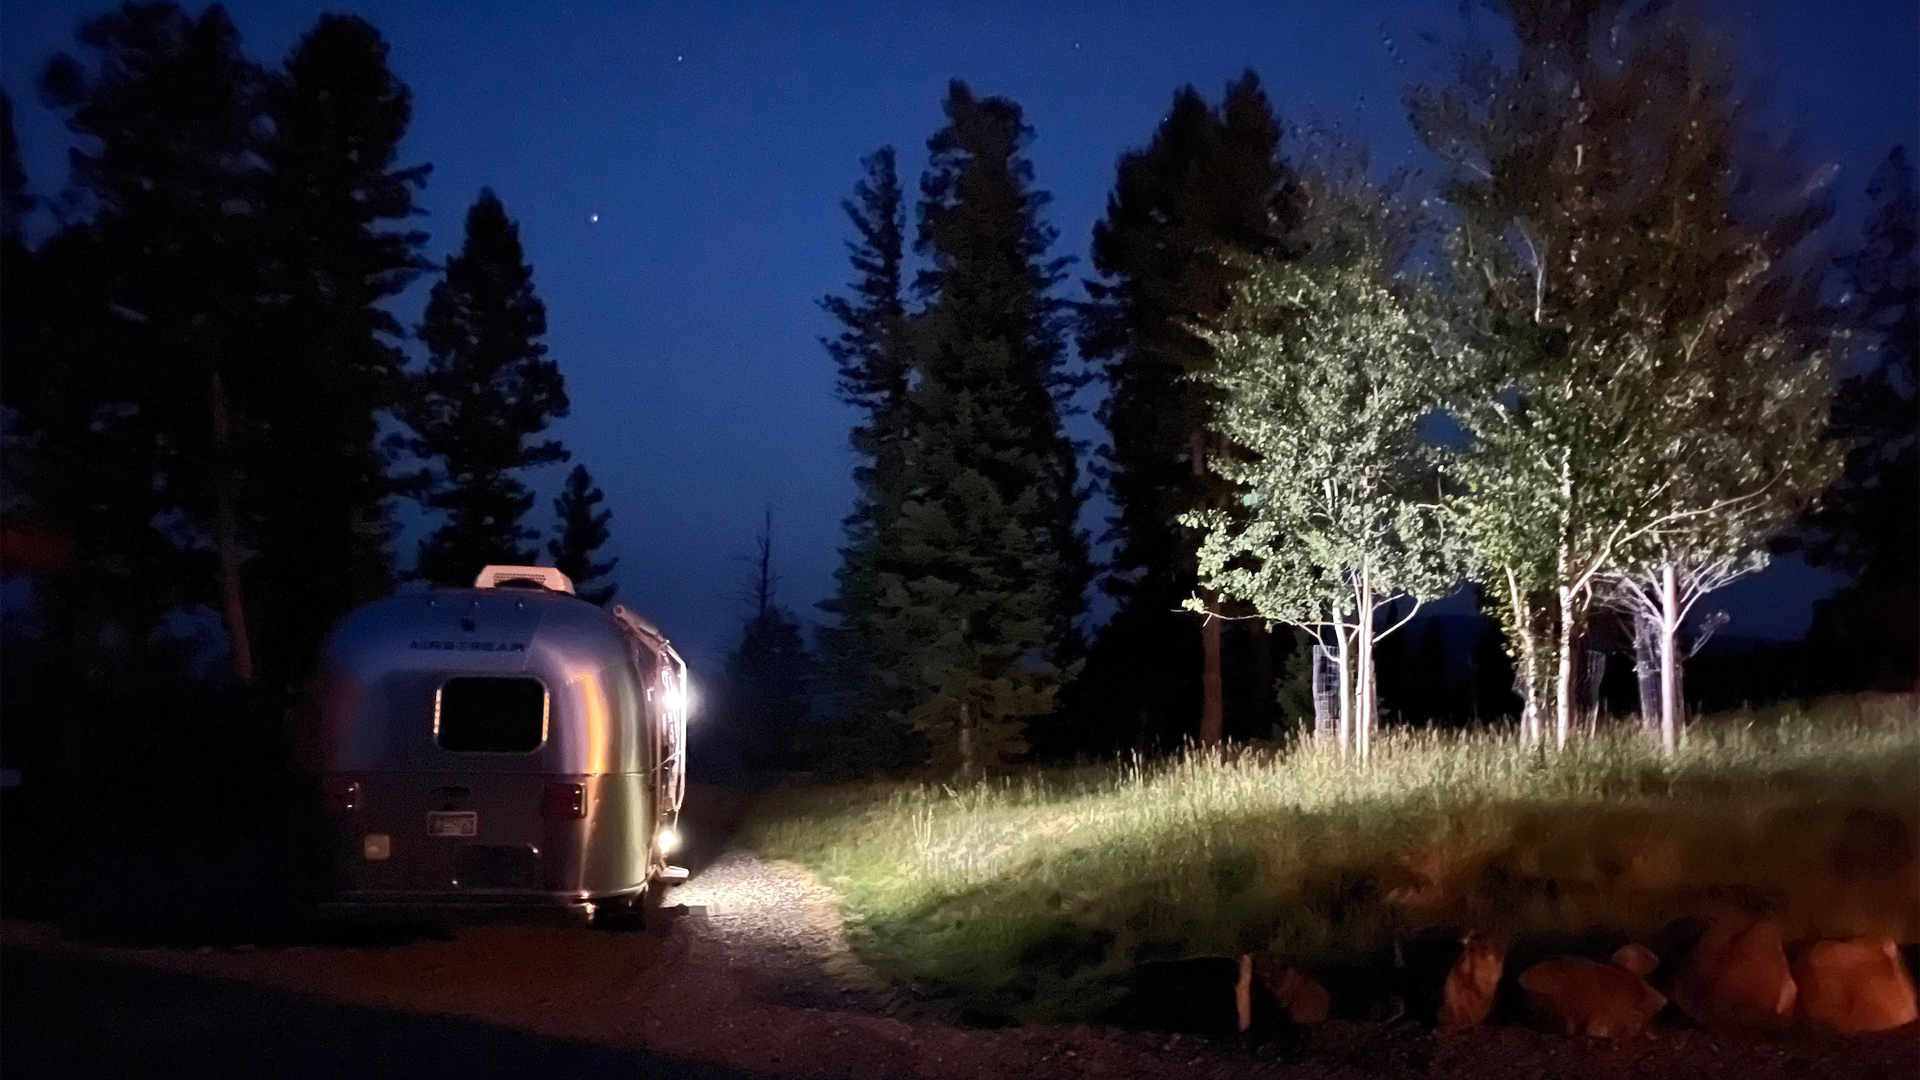 An Airstream travel trailer parked at an RV park at night.